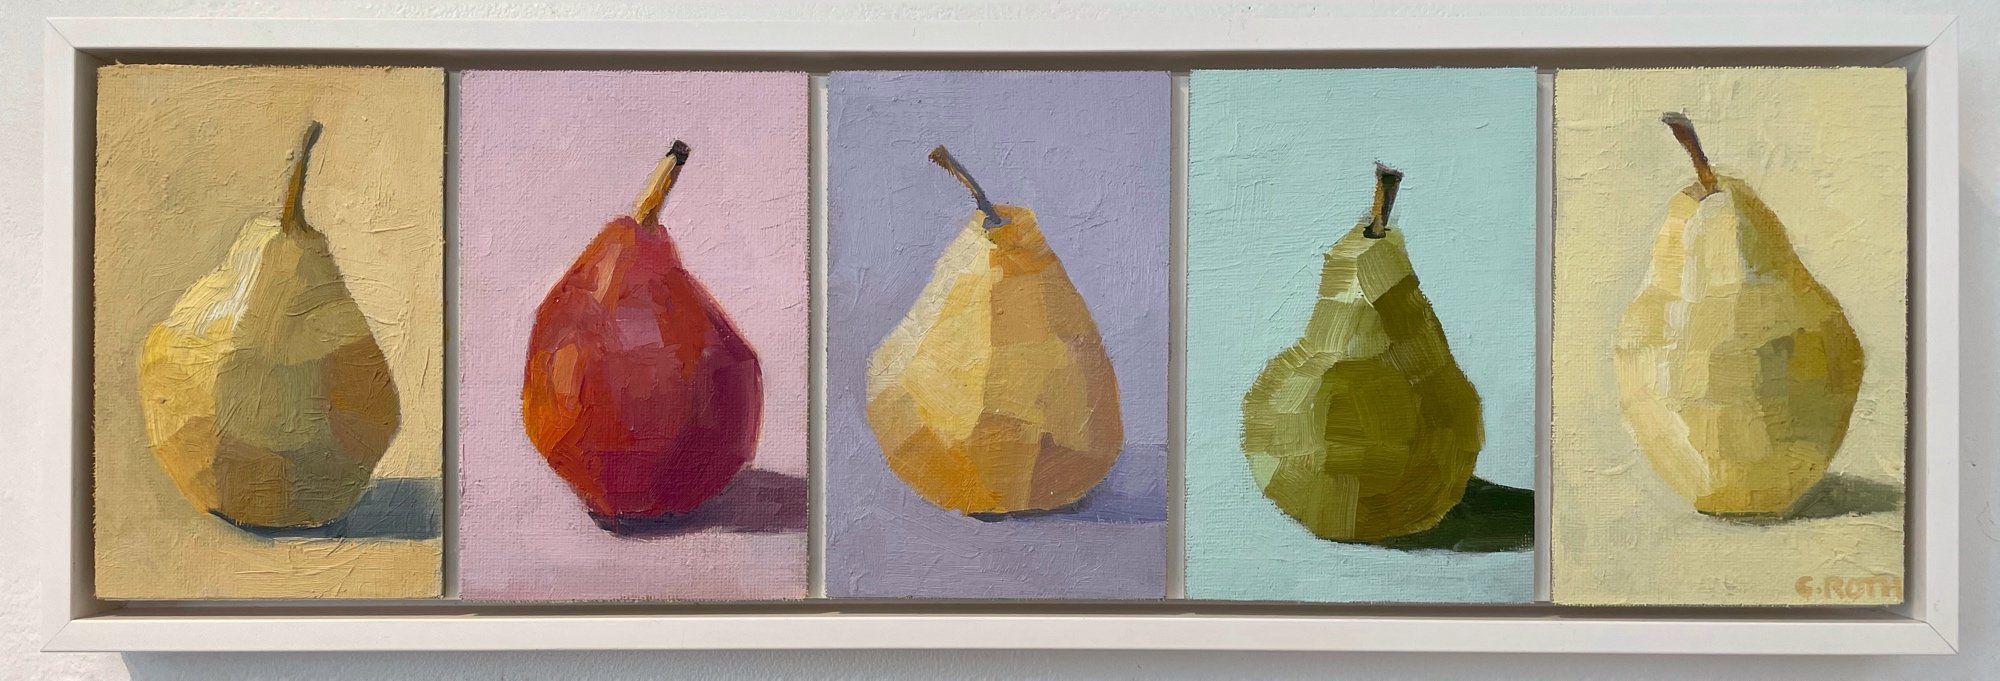 Five Pears by Carla Roth